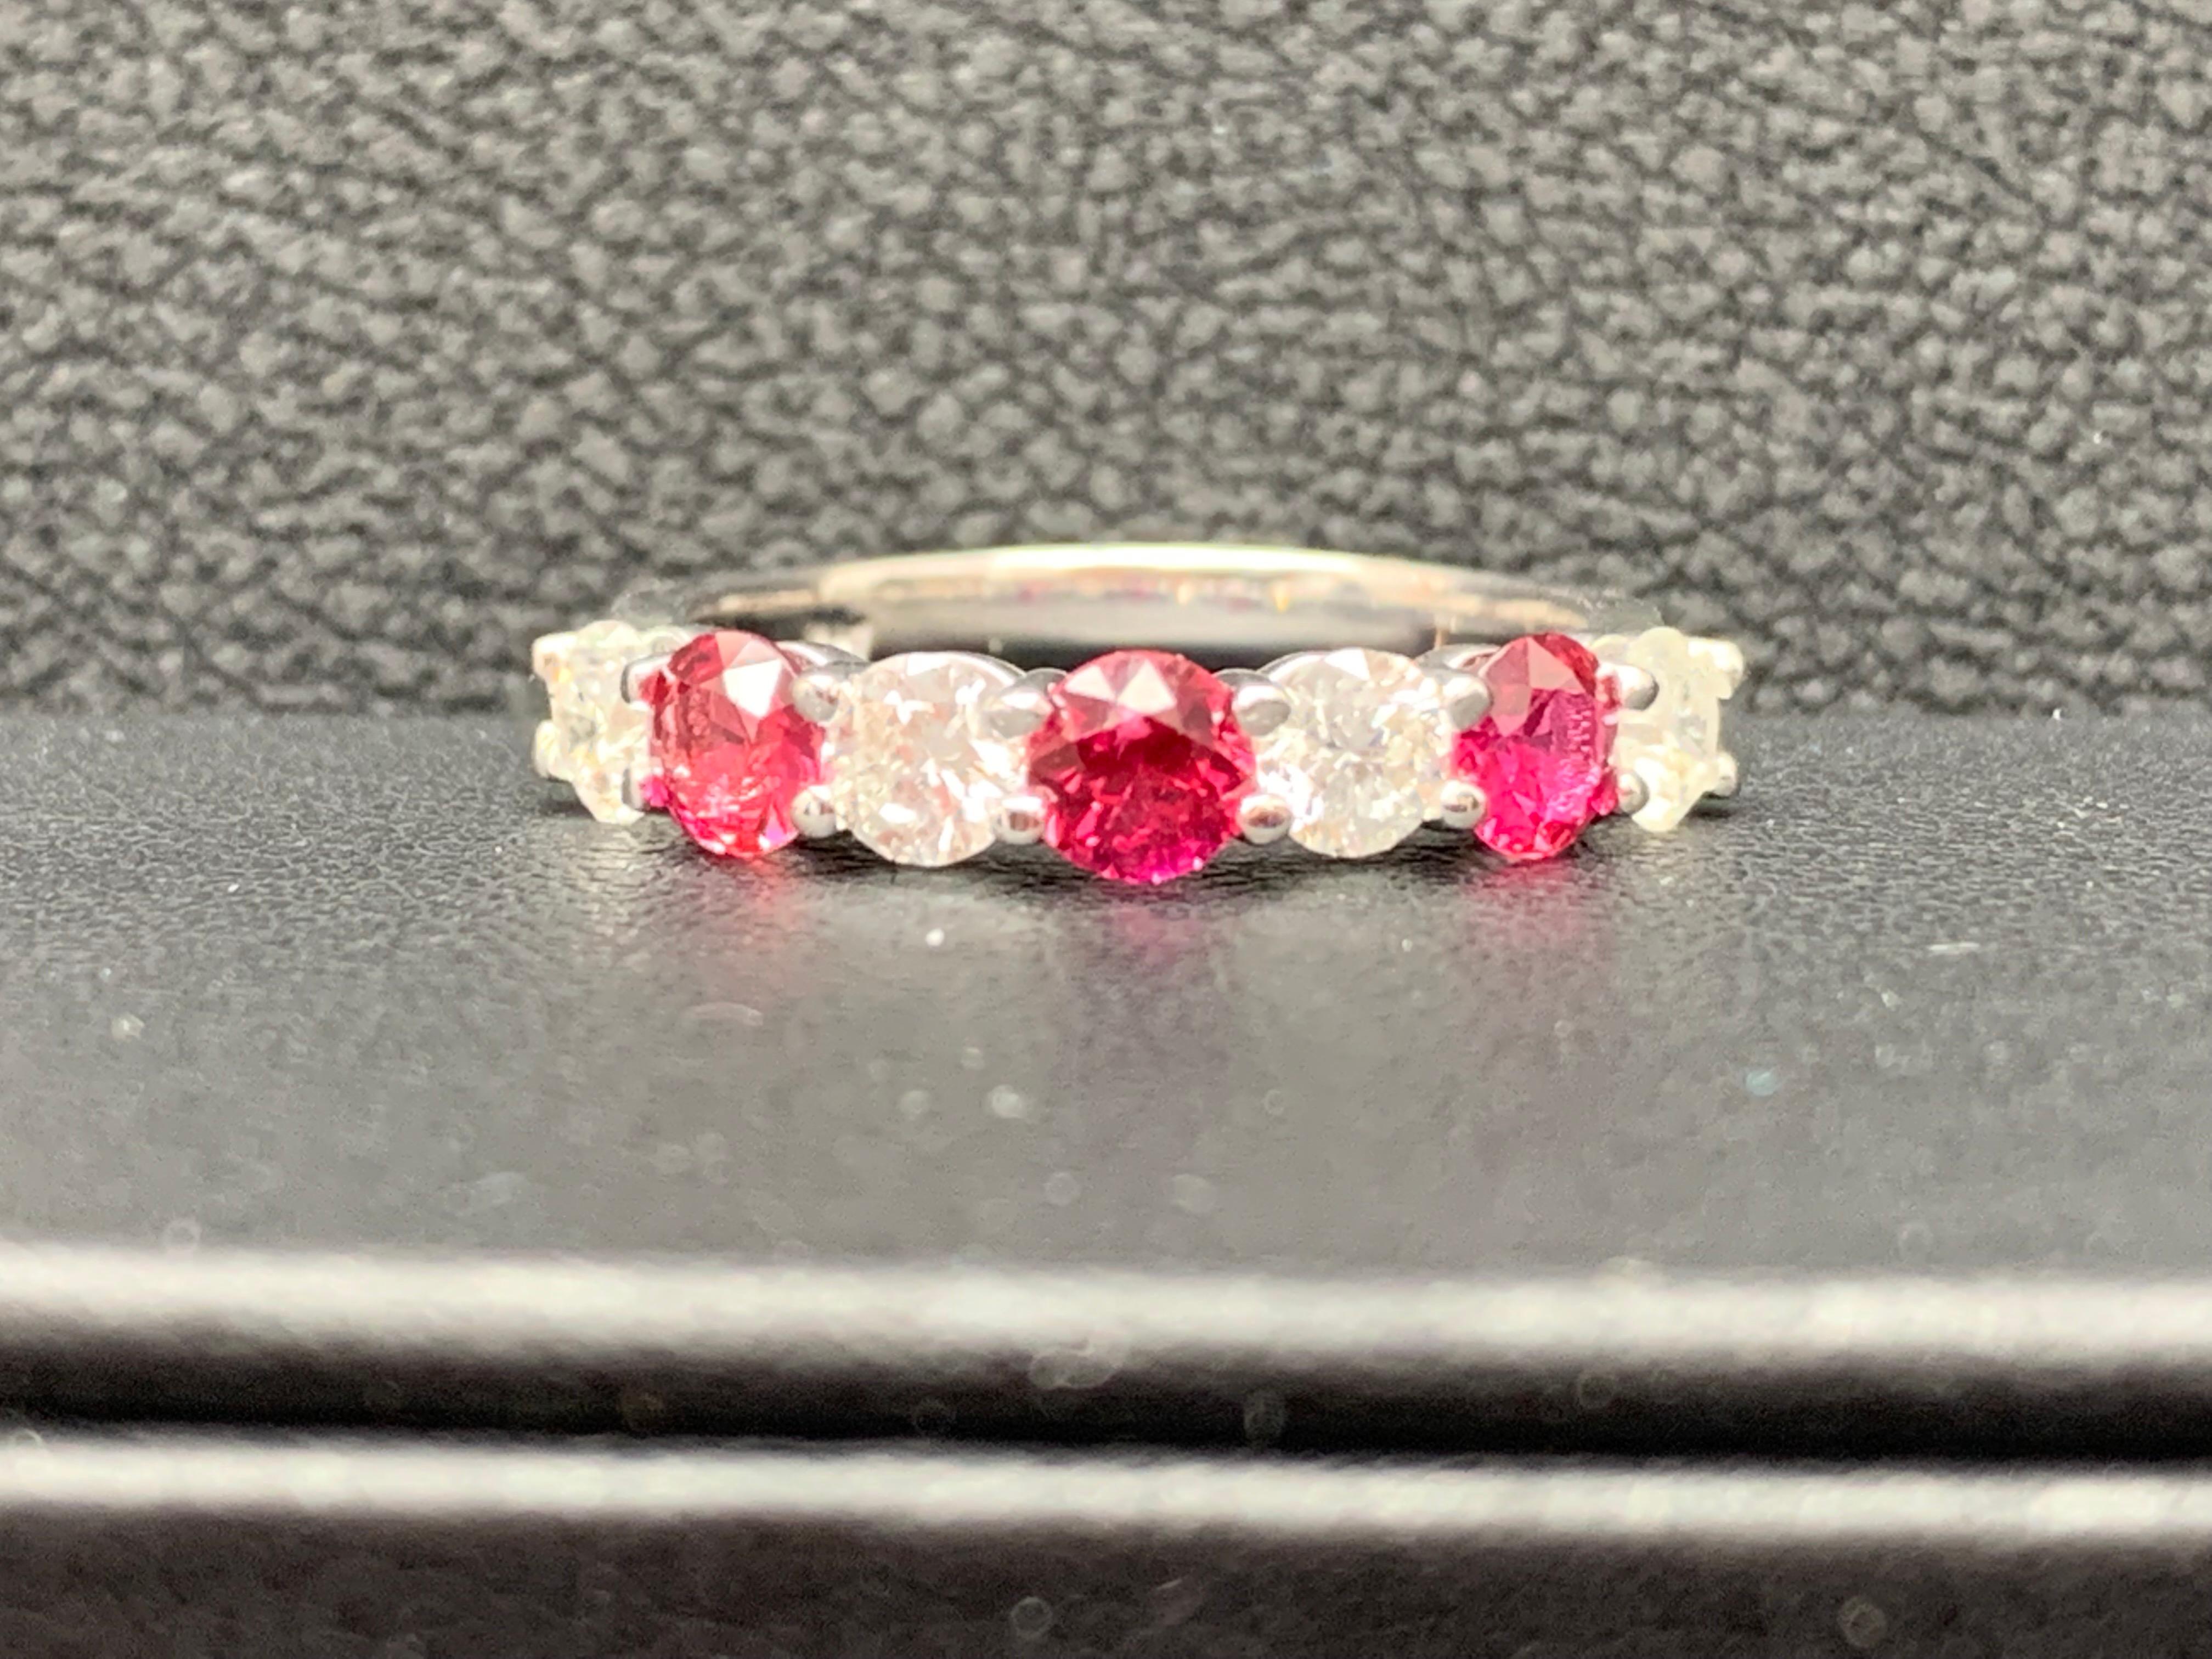 A fashionable and classic wedding band showcasing 3 color-rich red rubies weighing 0.87 carats total that alternate with 4 brilliant round diamonds weighing 0.75 carats total. Stones are secured with a shared prong setting made with 14 karats white